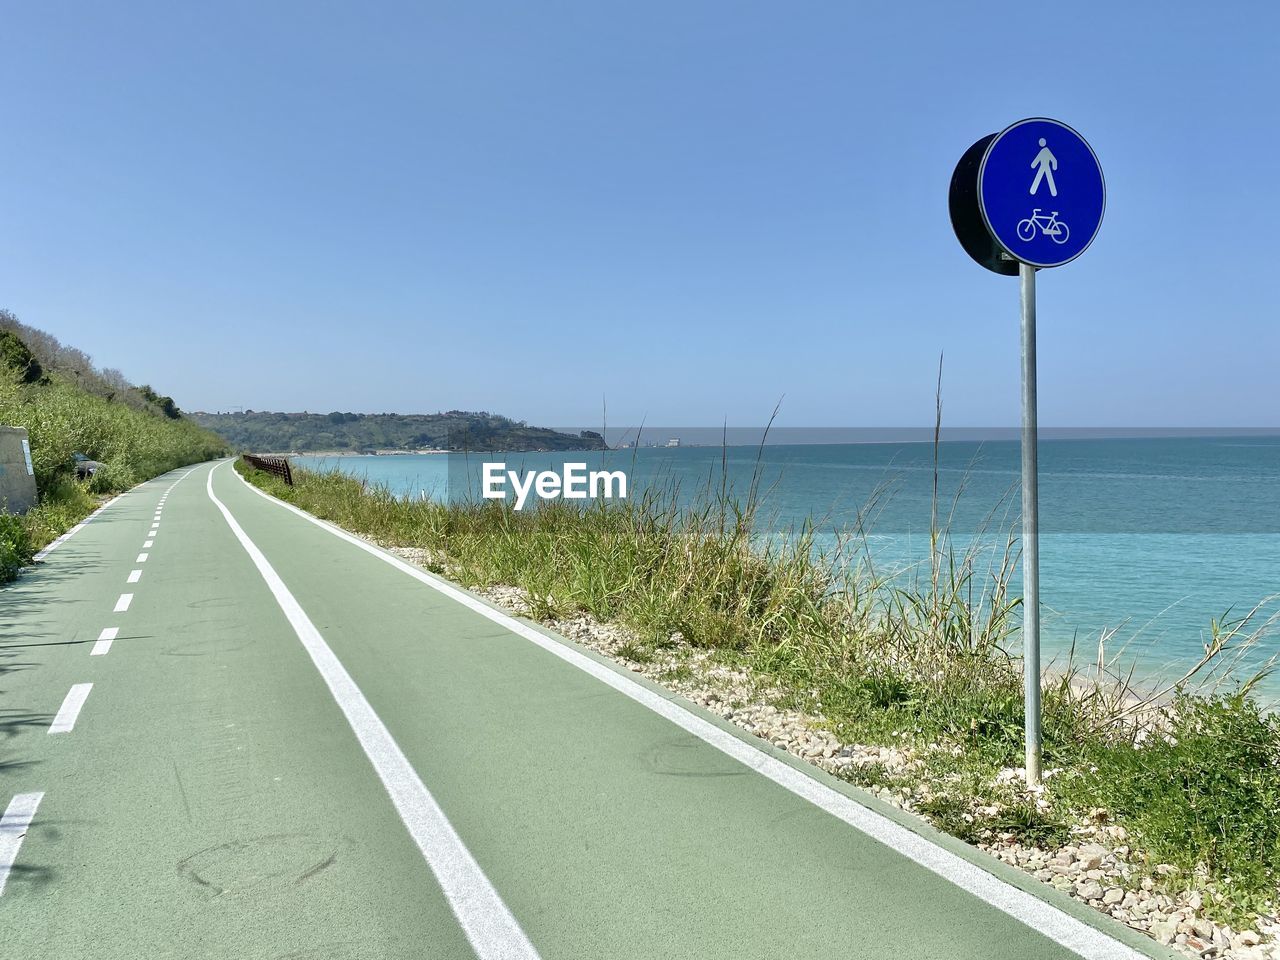 road, sky, sign, road sign, symbol, water, nature, sea, transportation, blue, clear sky, land, beach, no people, day, coast, guidance, scenics - nature, tranquility, horizon, the way forward, tranquil scene, beauty in nature, sunny, horizon over water, communication, plant, road marking, outdoors, travel, marking, traffic sign, arrow symbol, sunlight, vacation, grass, travel destinations, directional sign, walkway, highway, copy space, shore, infrastructure, non-urban scene, environment